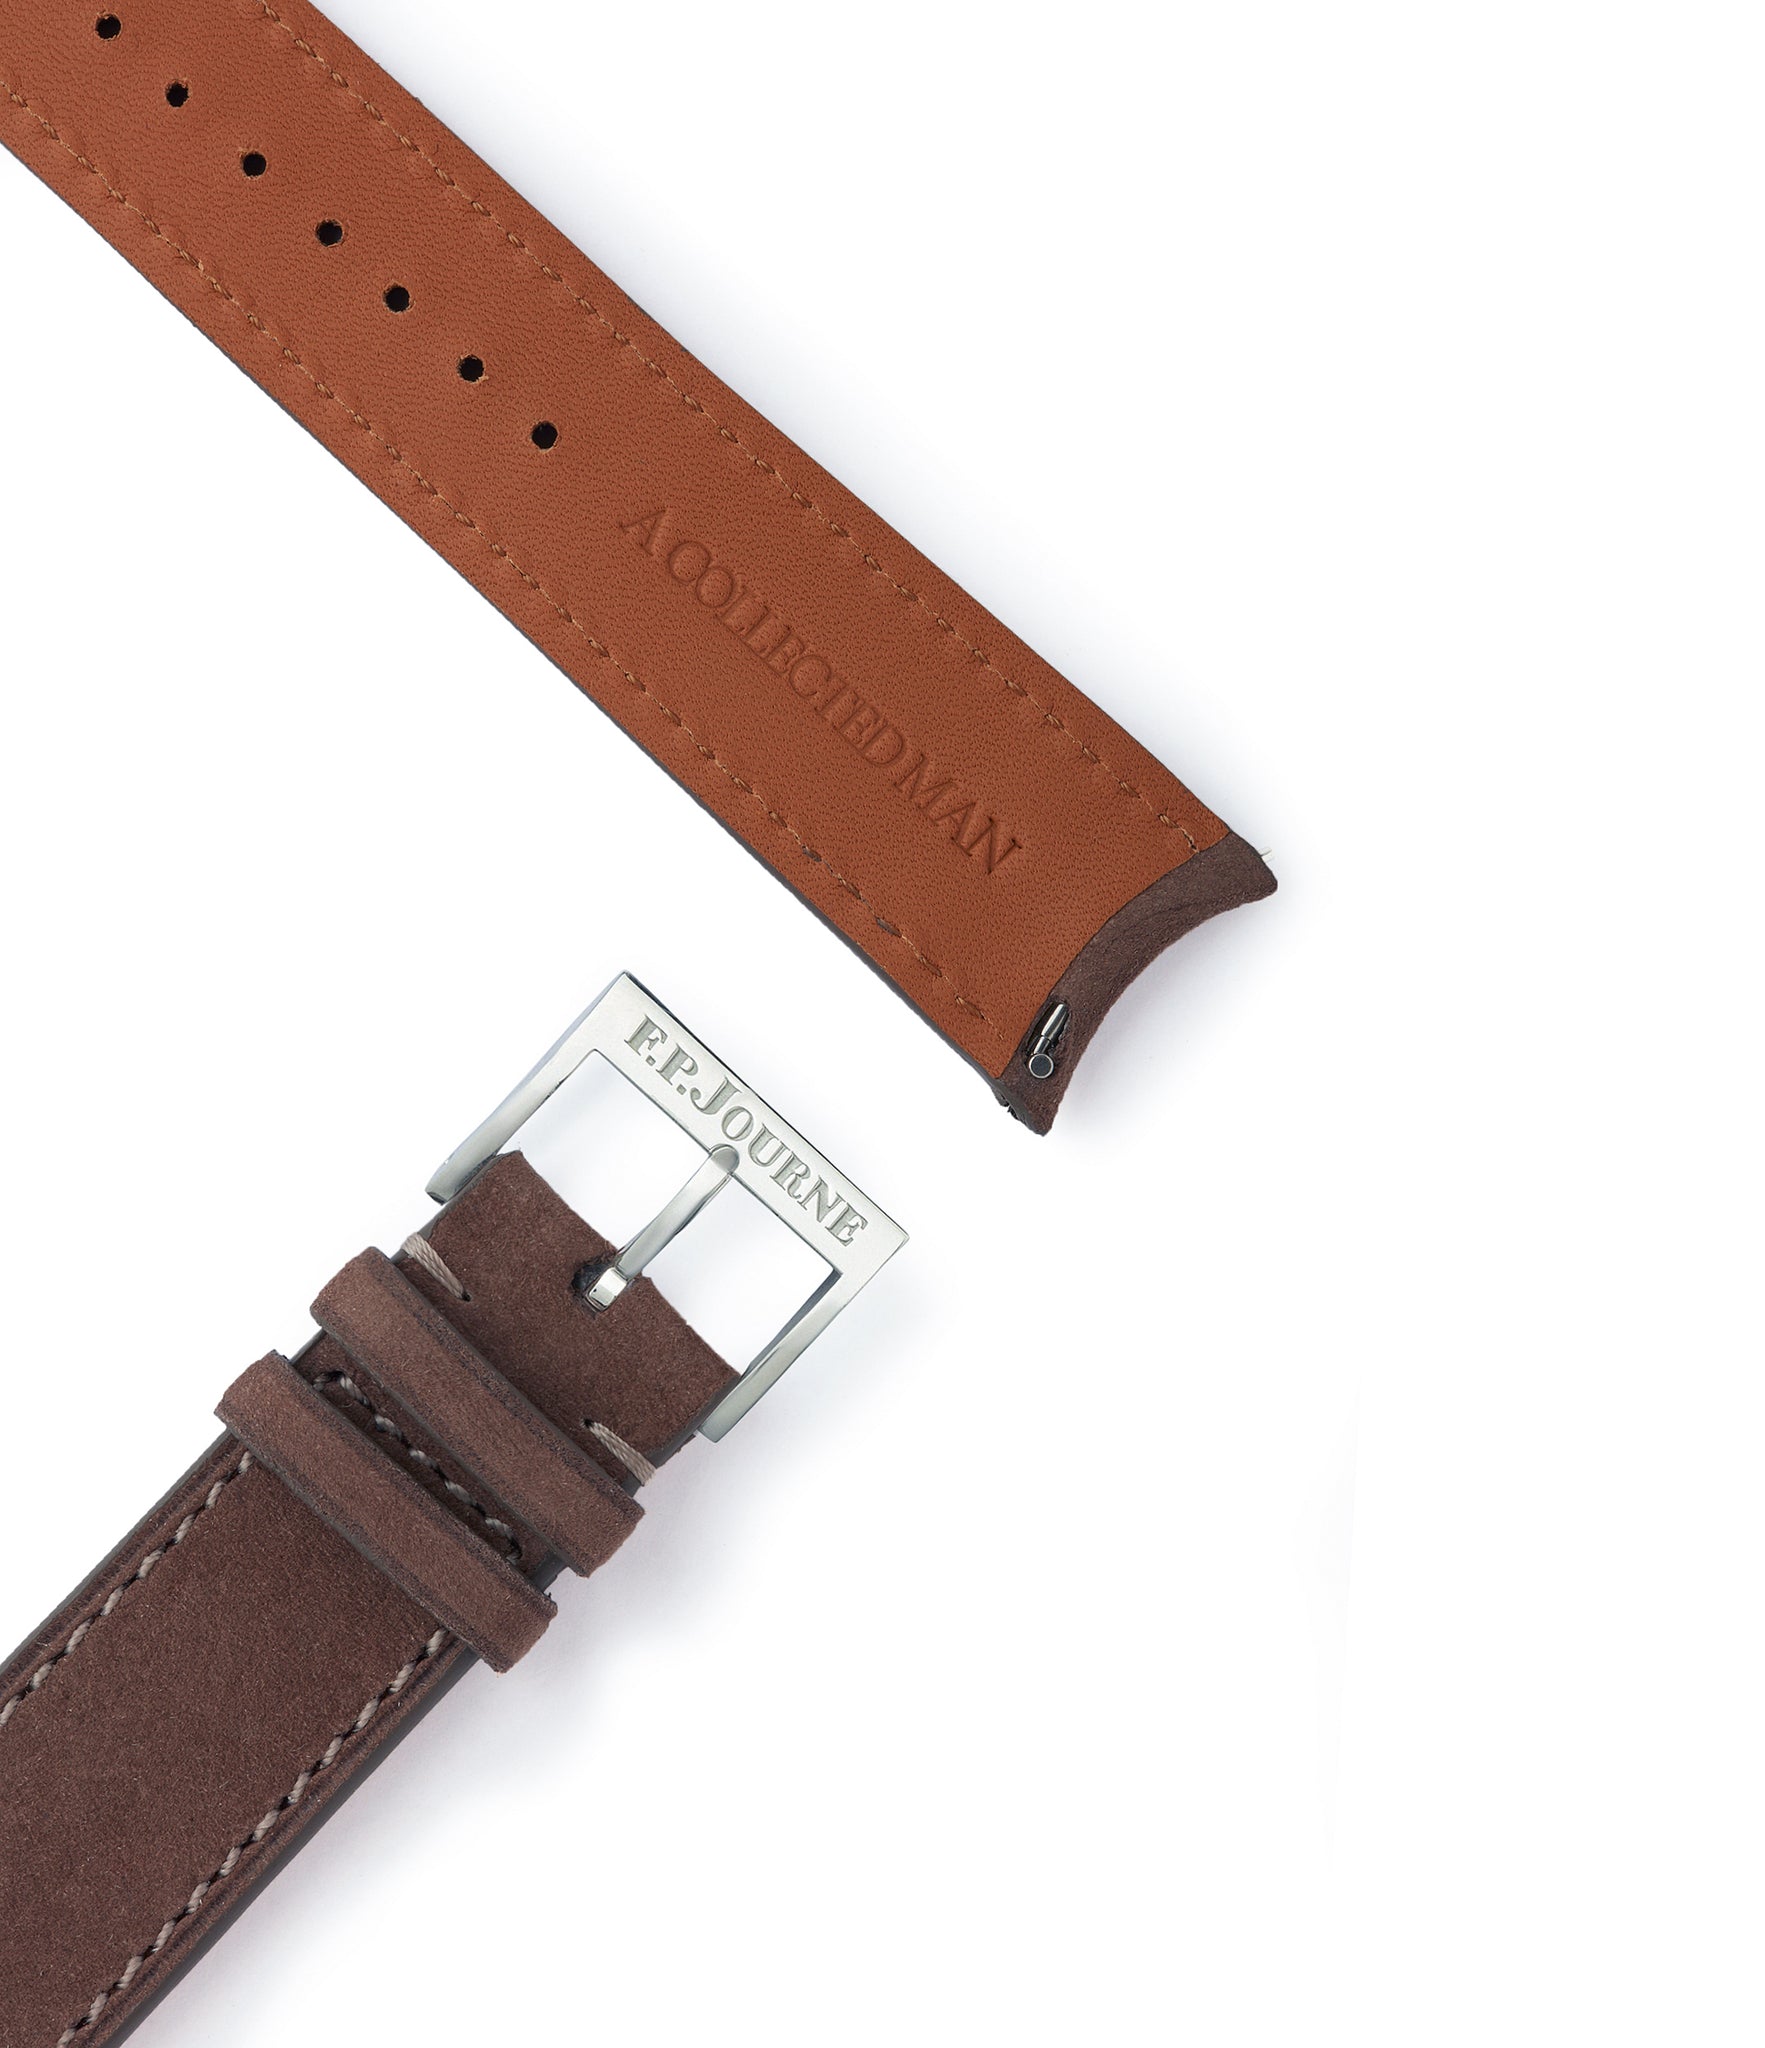 Buy 20mm x 19mm Geneva Molequin F. P. Journe curved watch strap smoke brown taupe buffalo nubuck leather quick-release springbars buckle for sale online at A Collected Man London